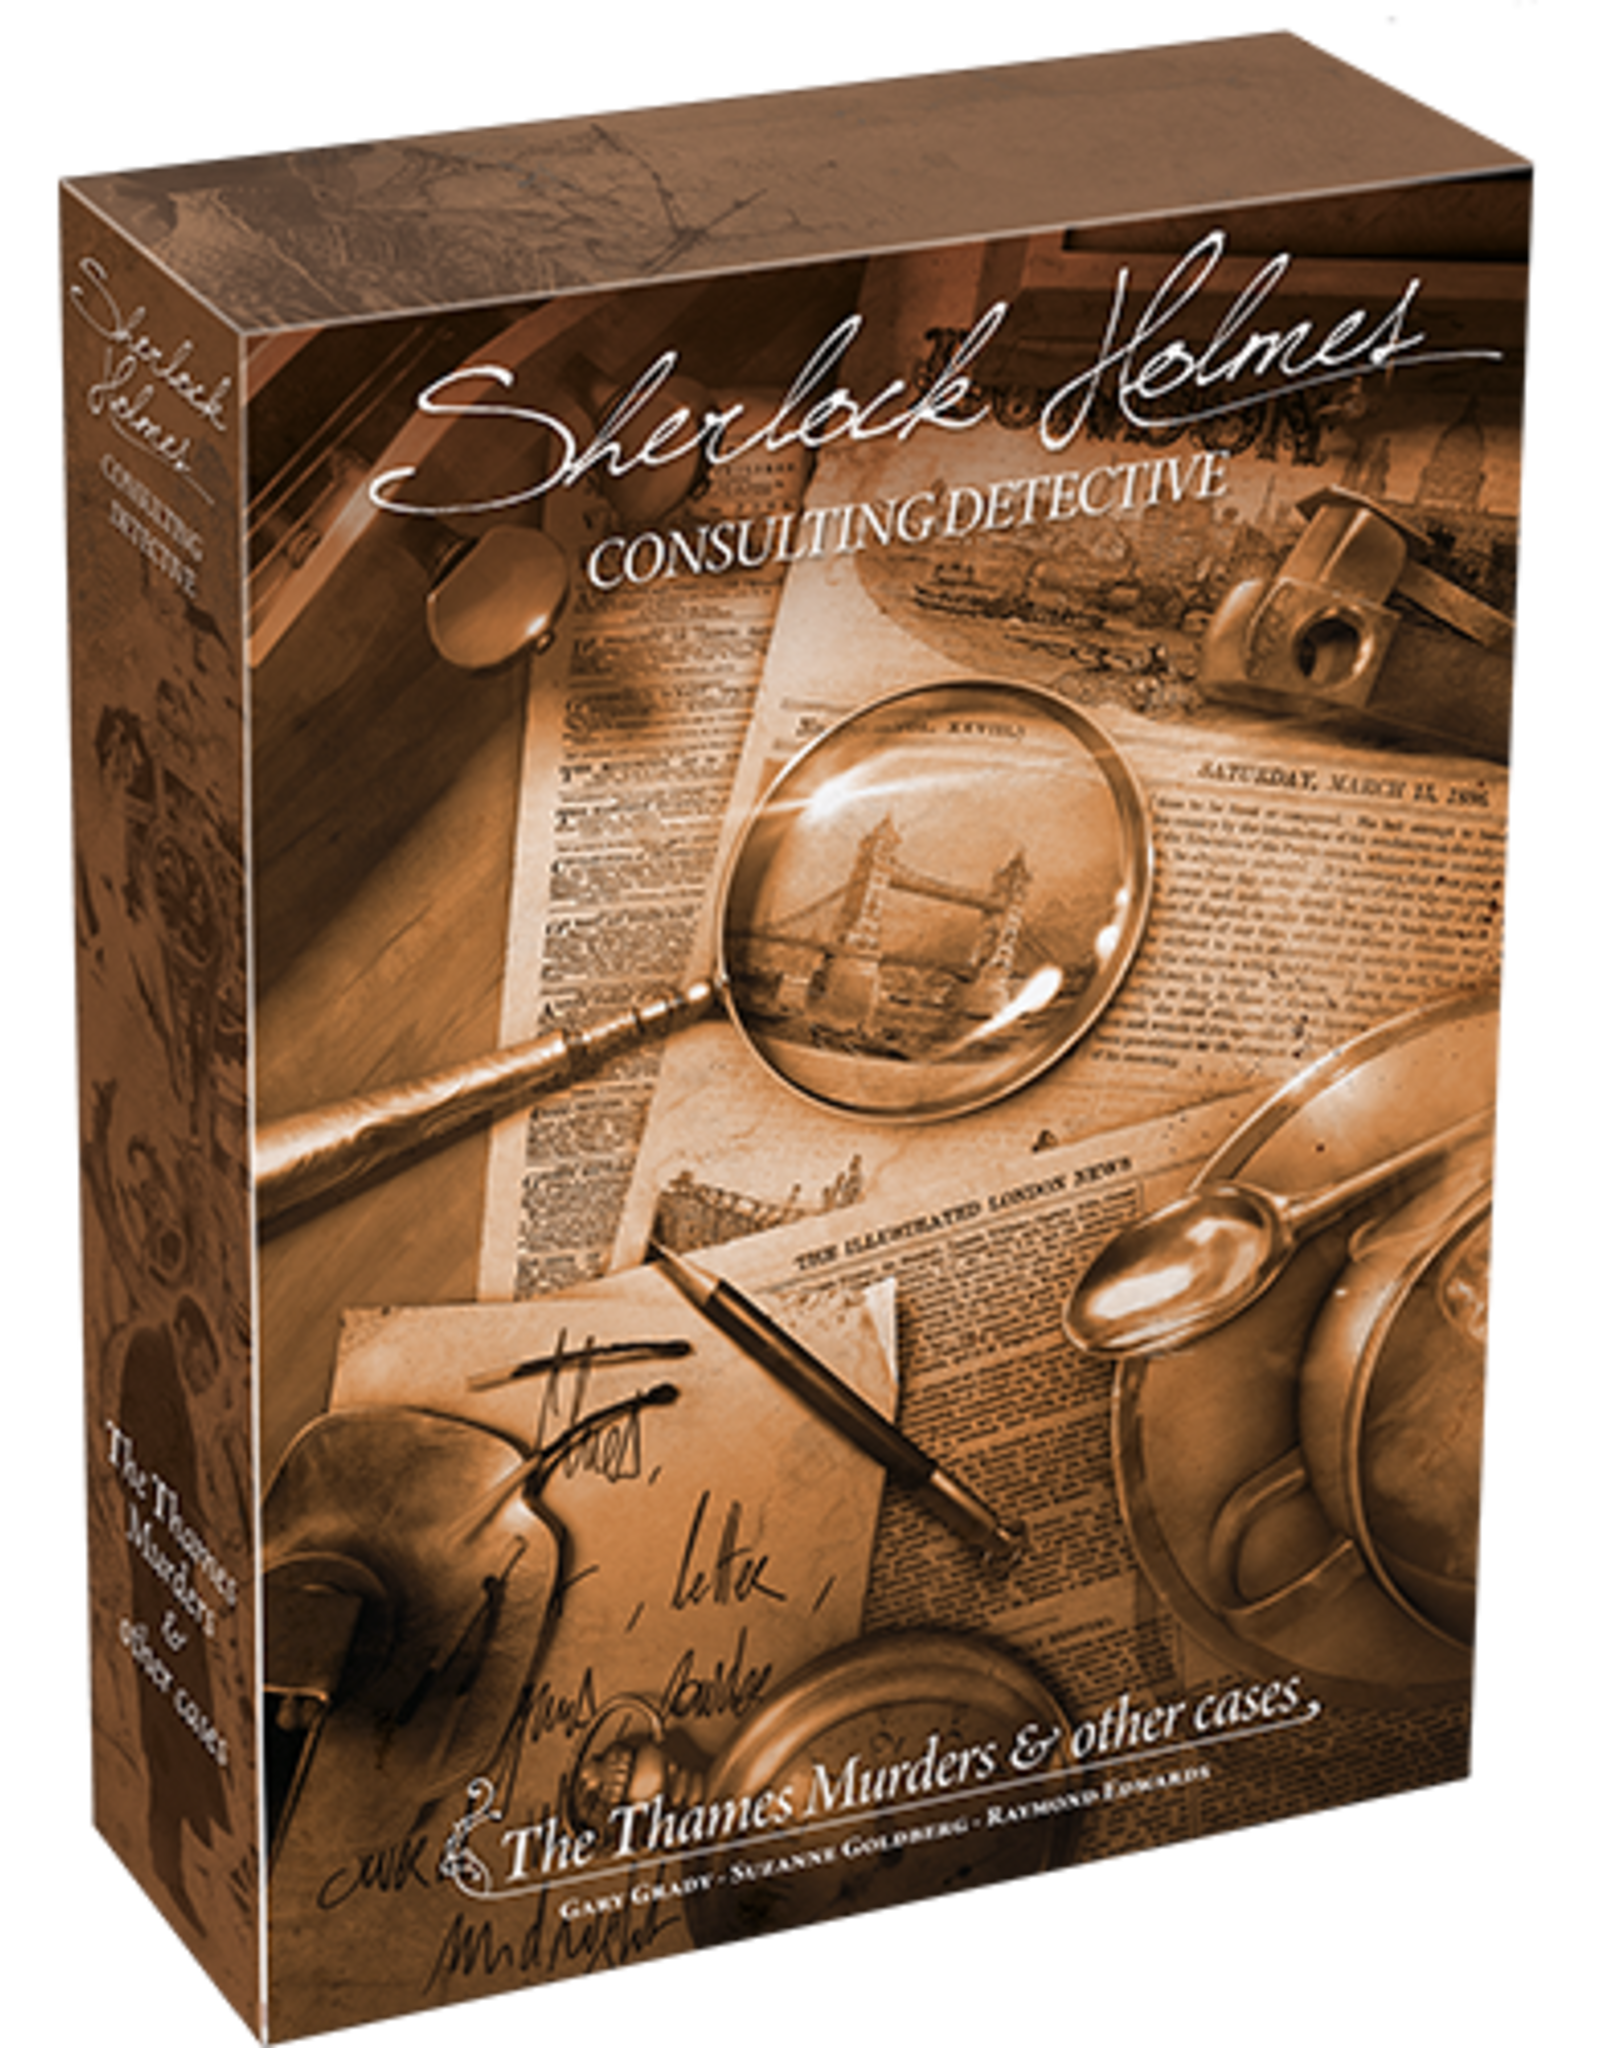 Space Cowboys Sherlock Holmes: Consulting Detective: Thames Murders